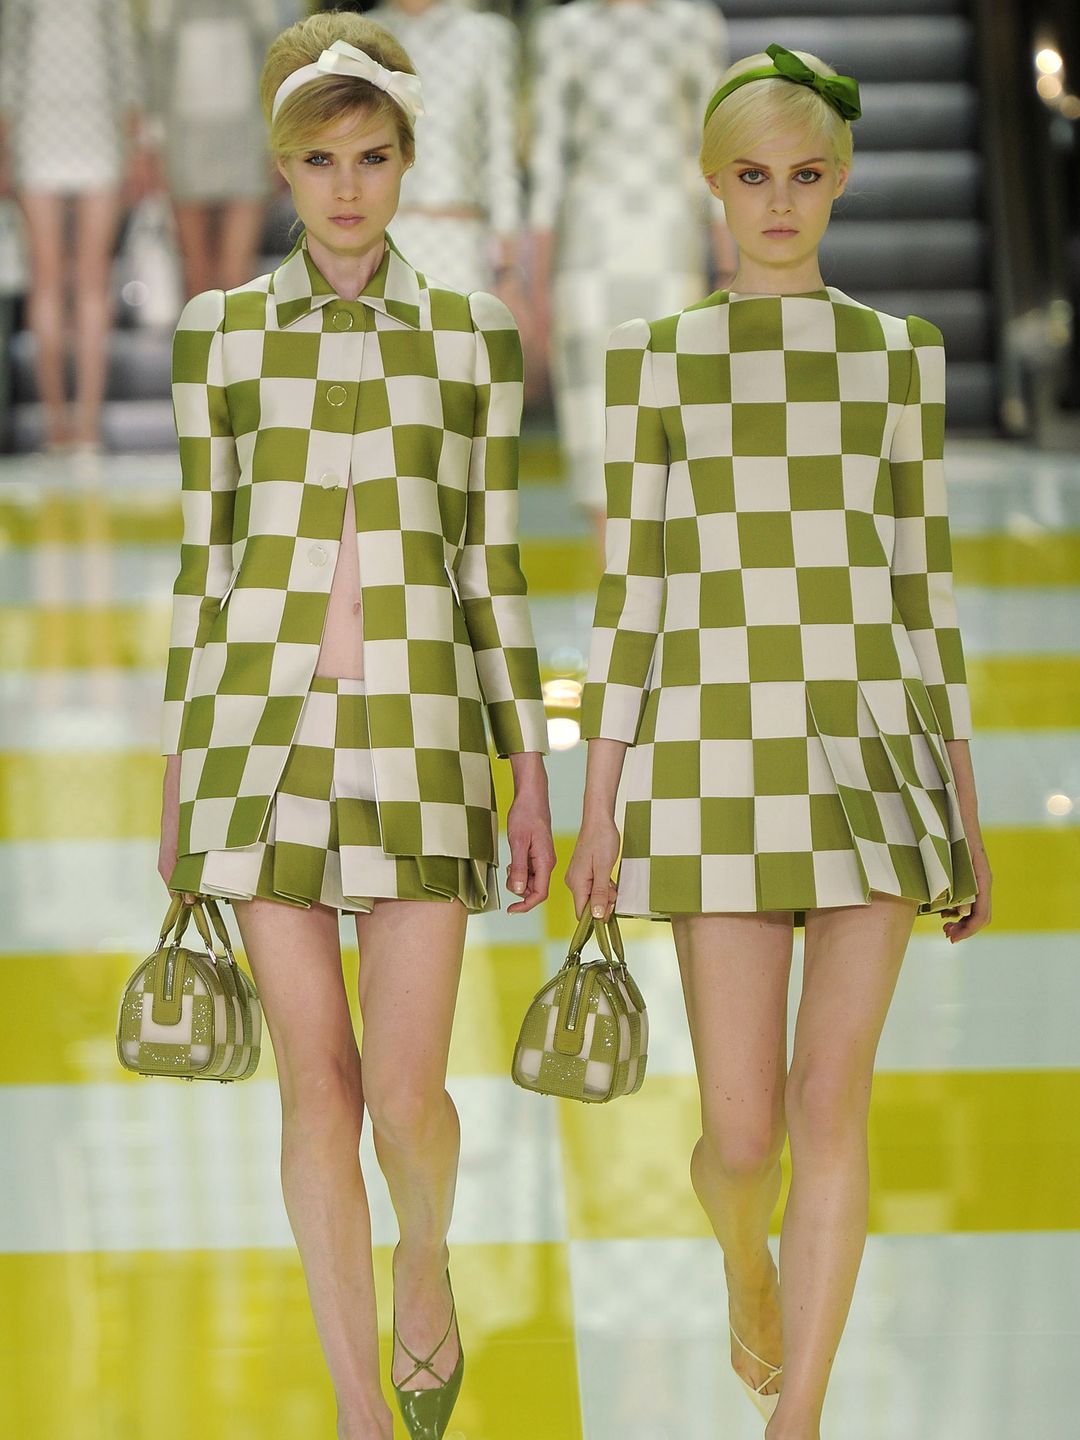 A model walks the runway at the Louis Vuitton Spring Summer 2013 fashion show in green and white dressed